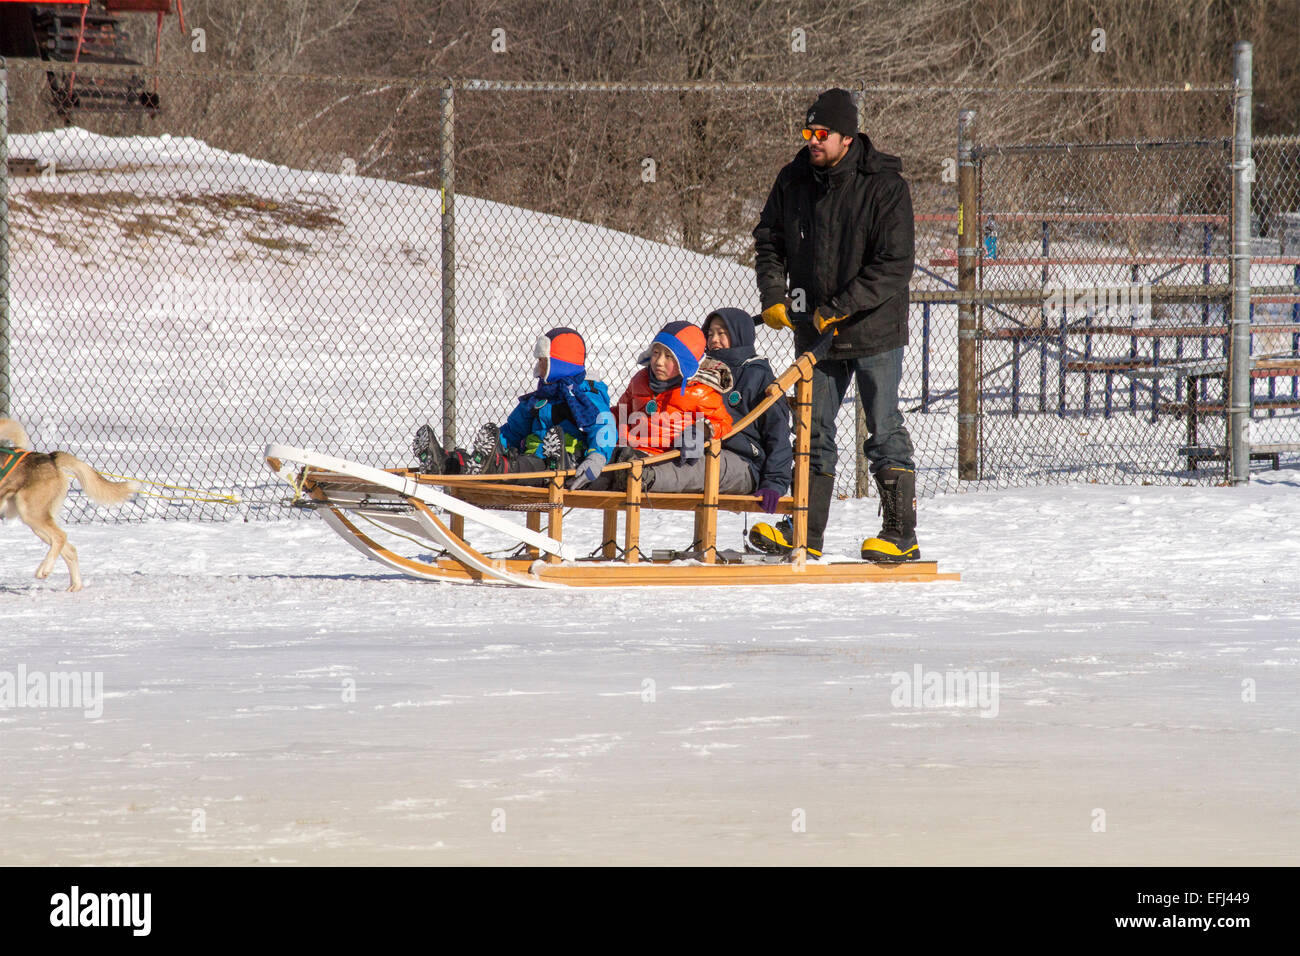 Three children on a dog sled ride at the Cannington Dog Sled Races and Winter Festival Stock Photo